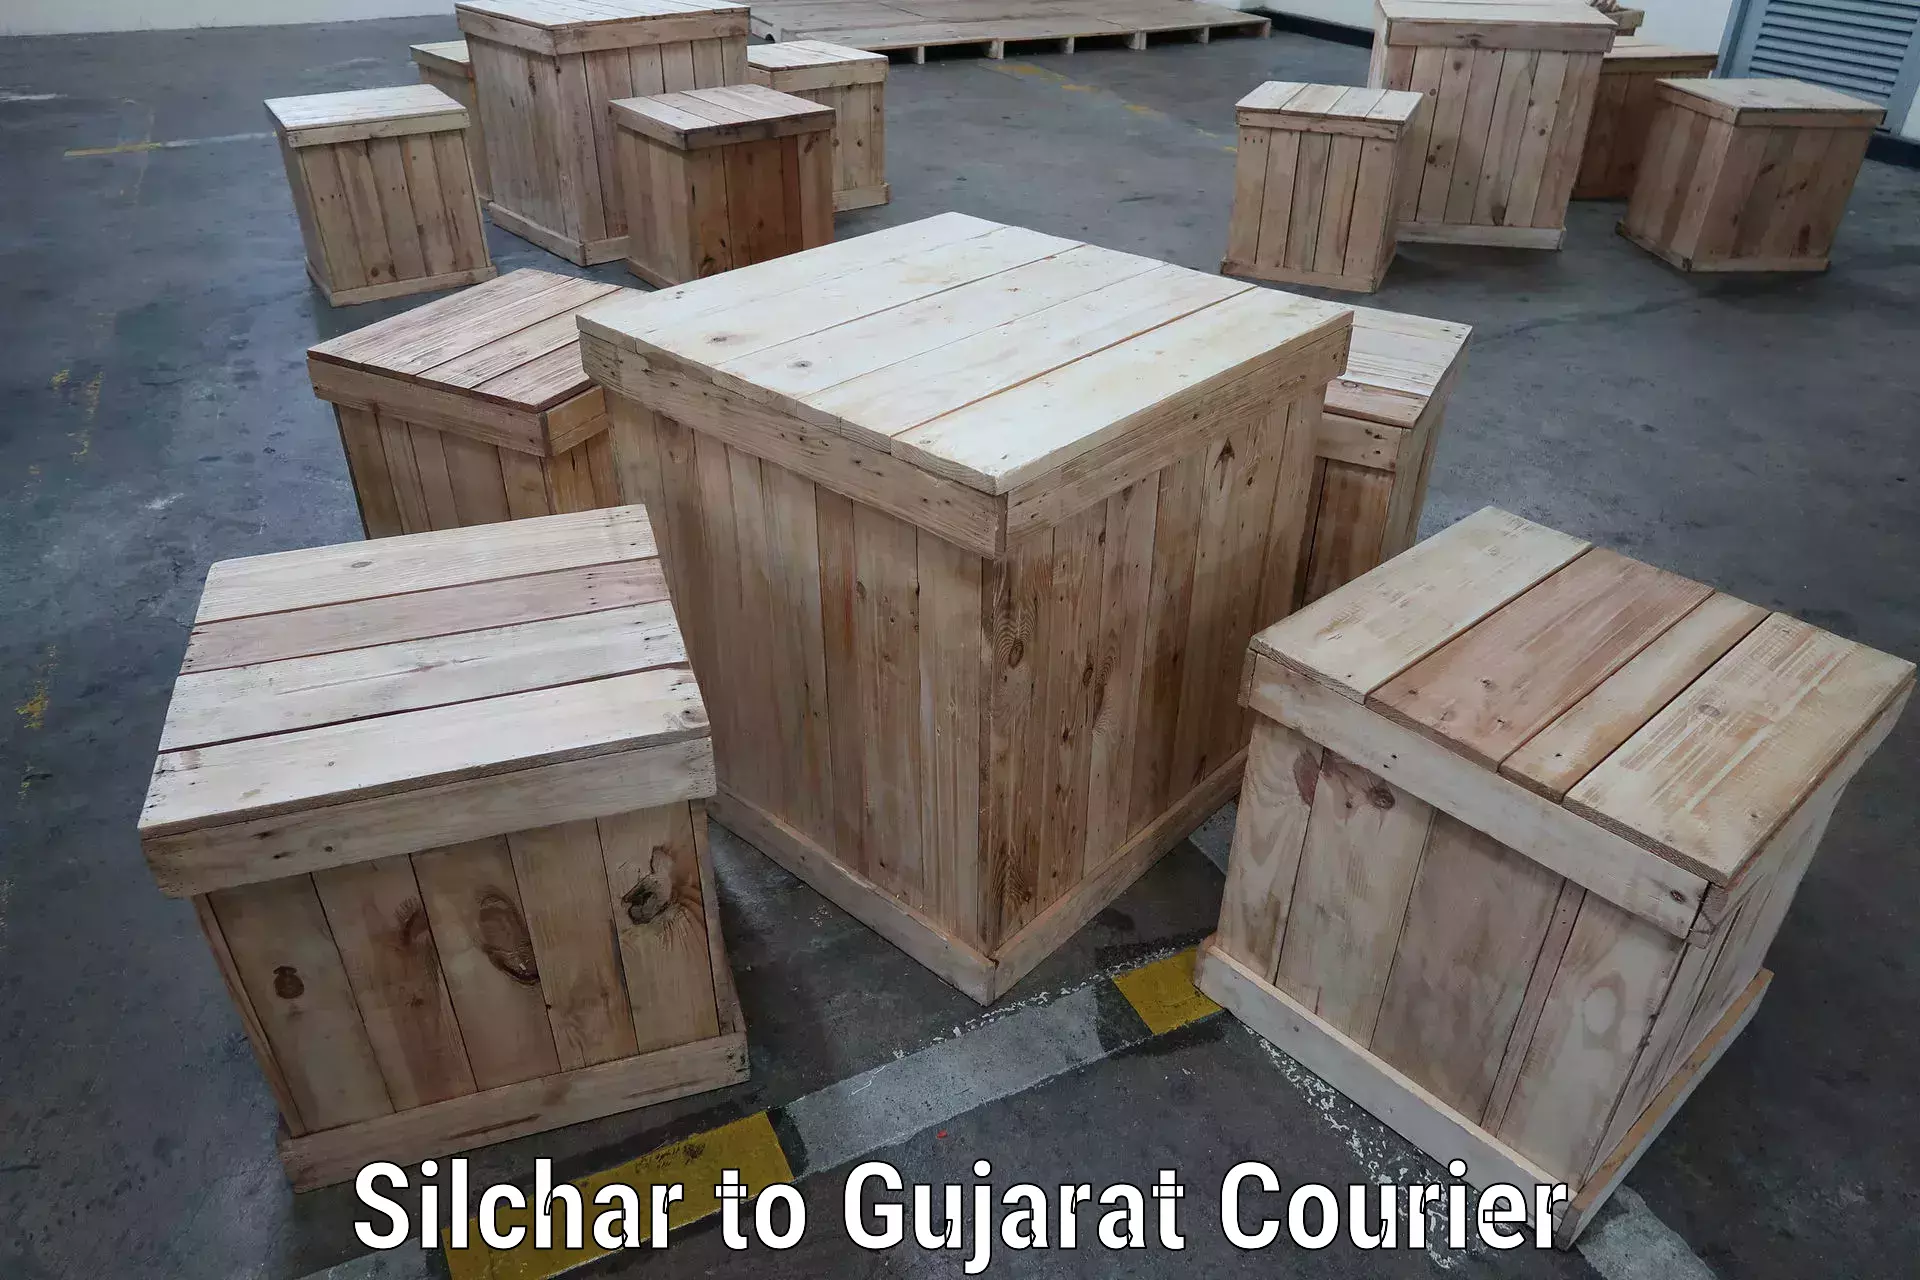 Global shipping solutions Silchar to Gujarat